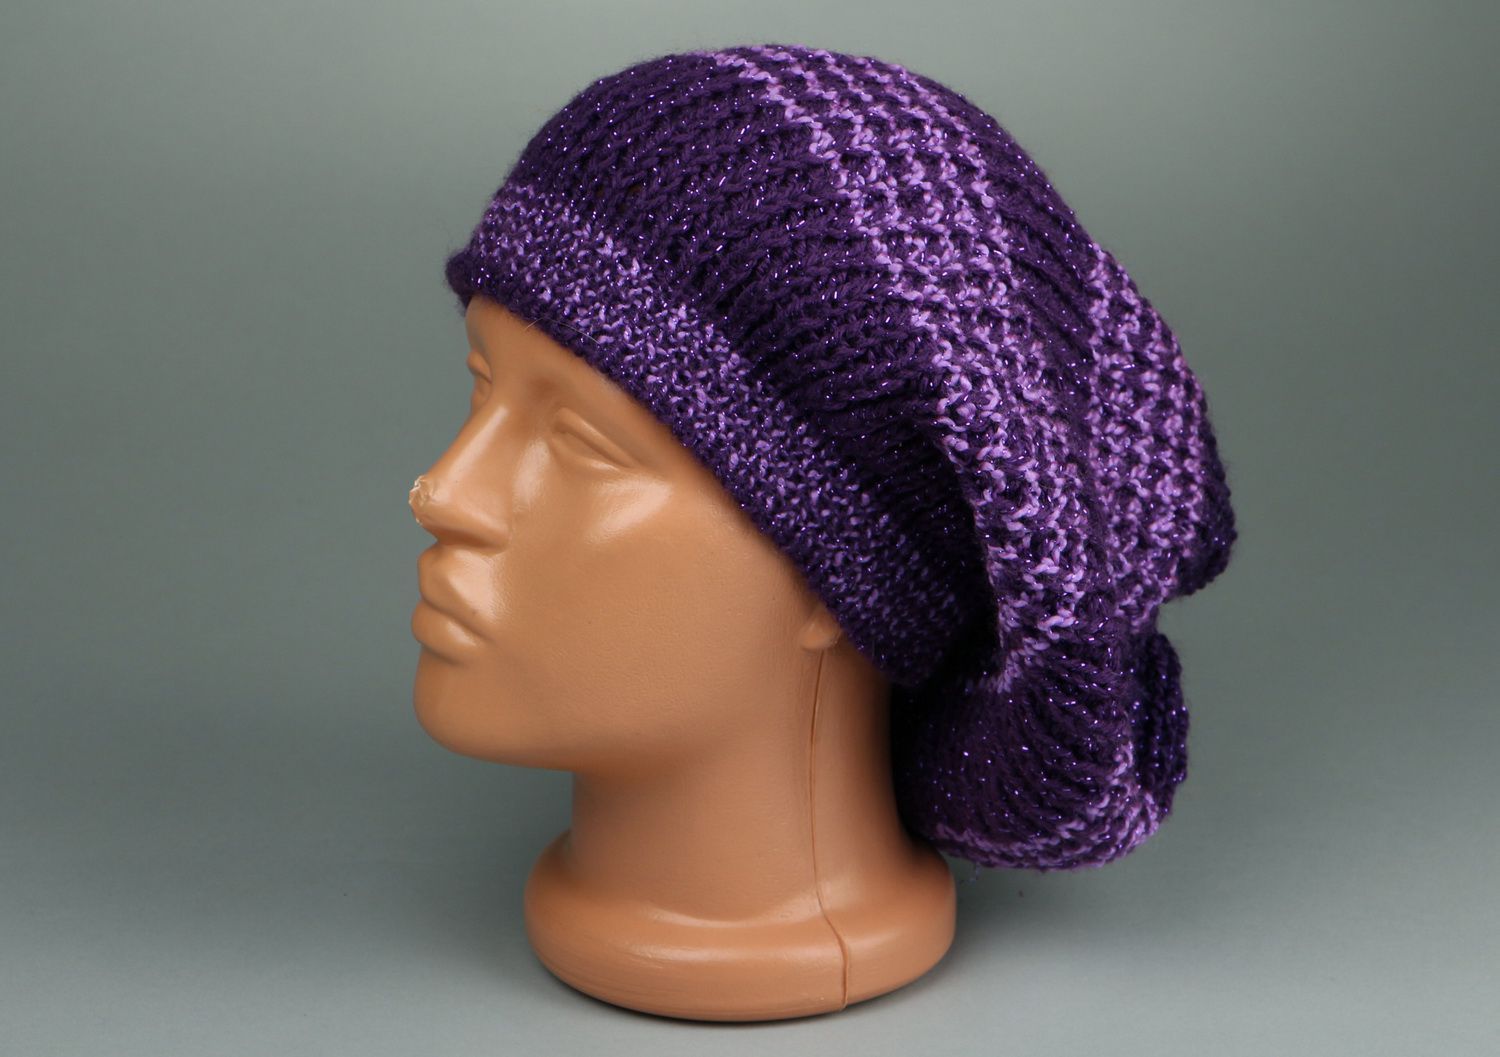 American knitted lilac beret photo 3